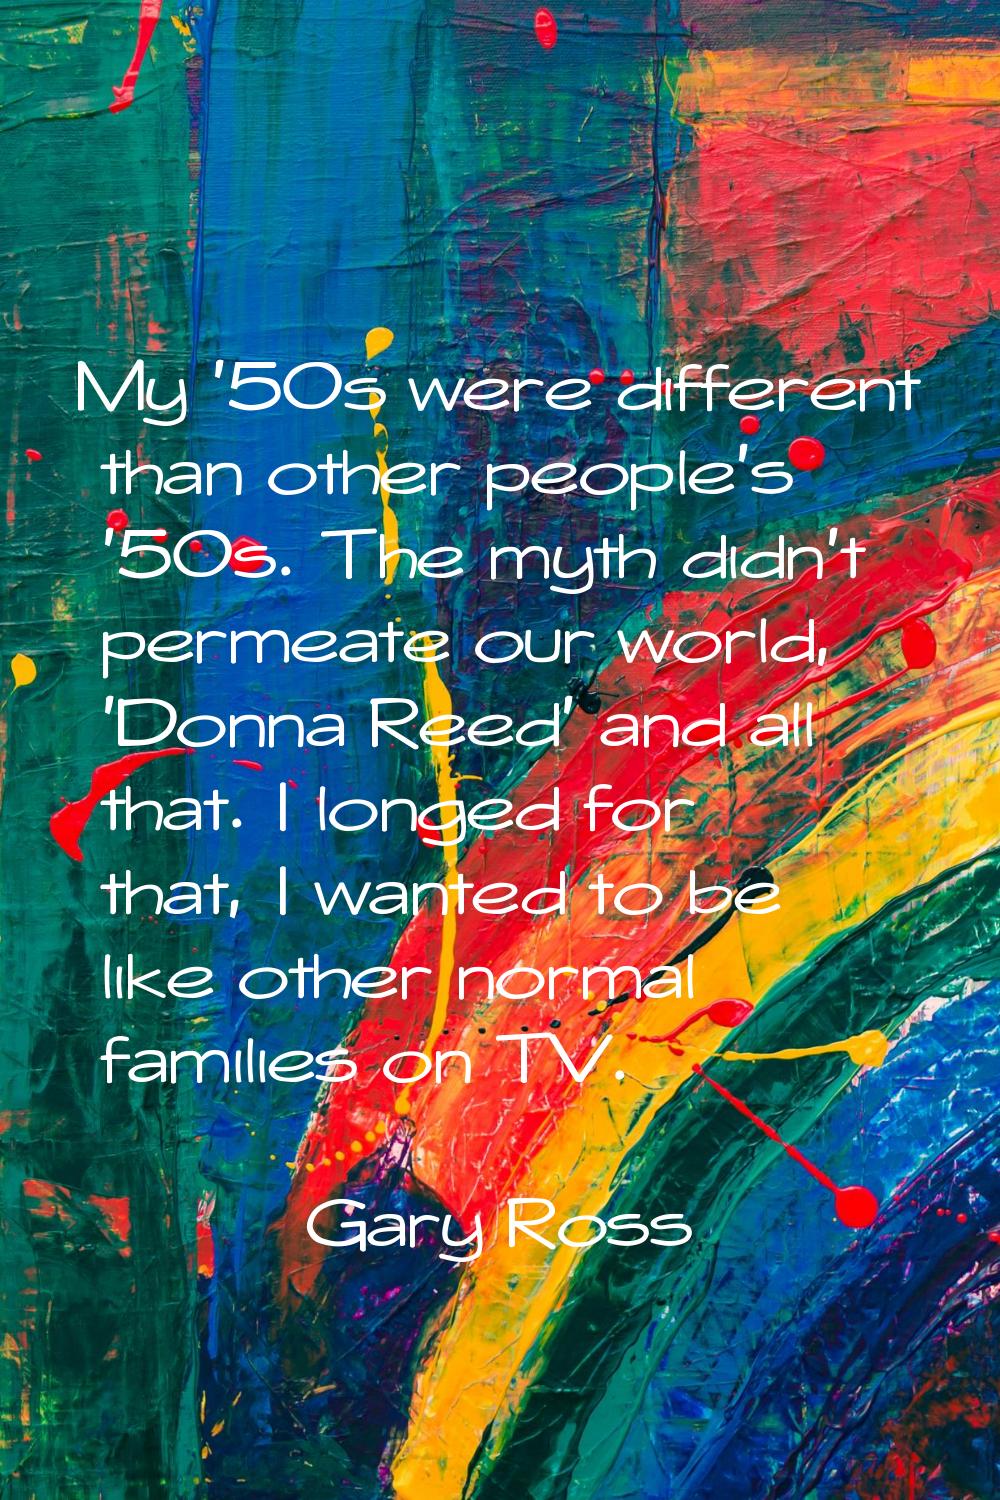 My '50s were different than other people's '50s. The myth didn't permeate our world, 'Donna Reed' a